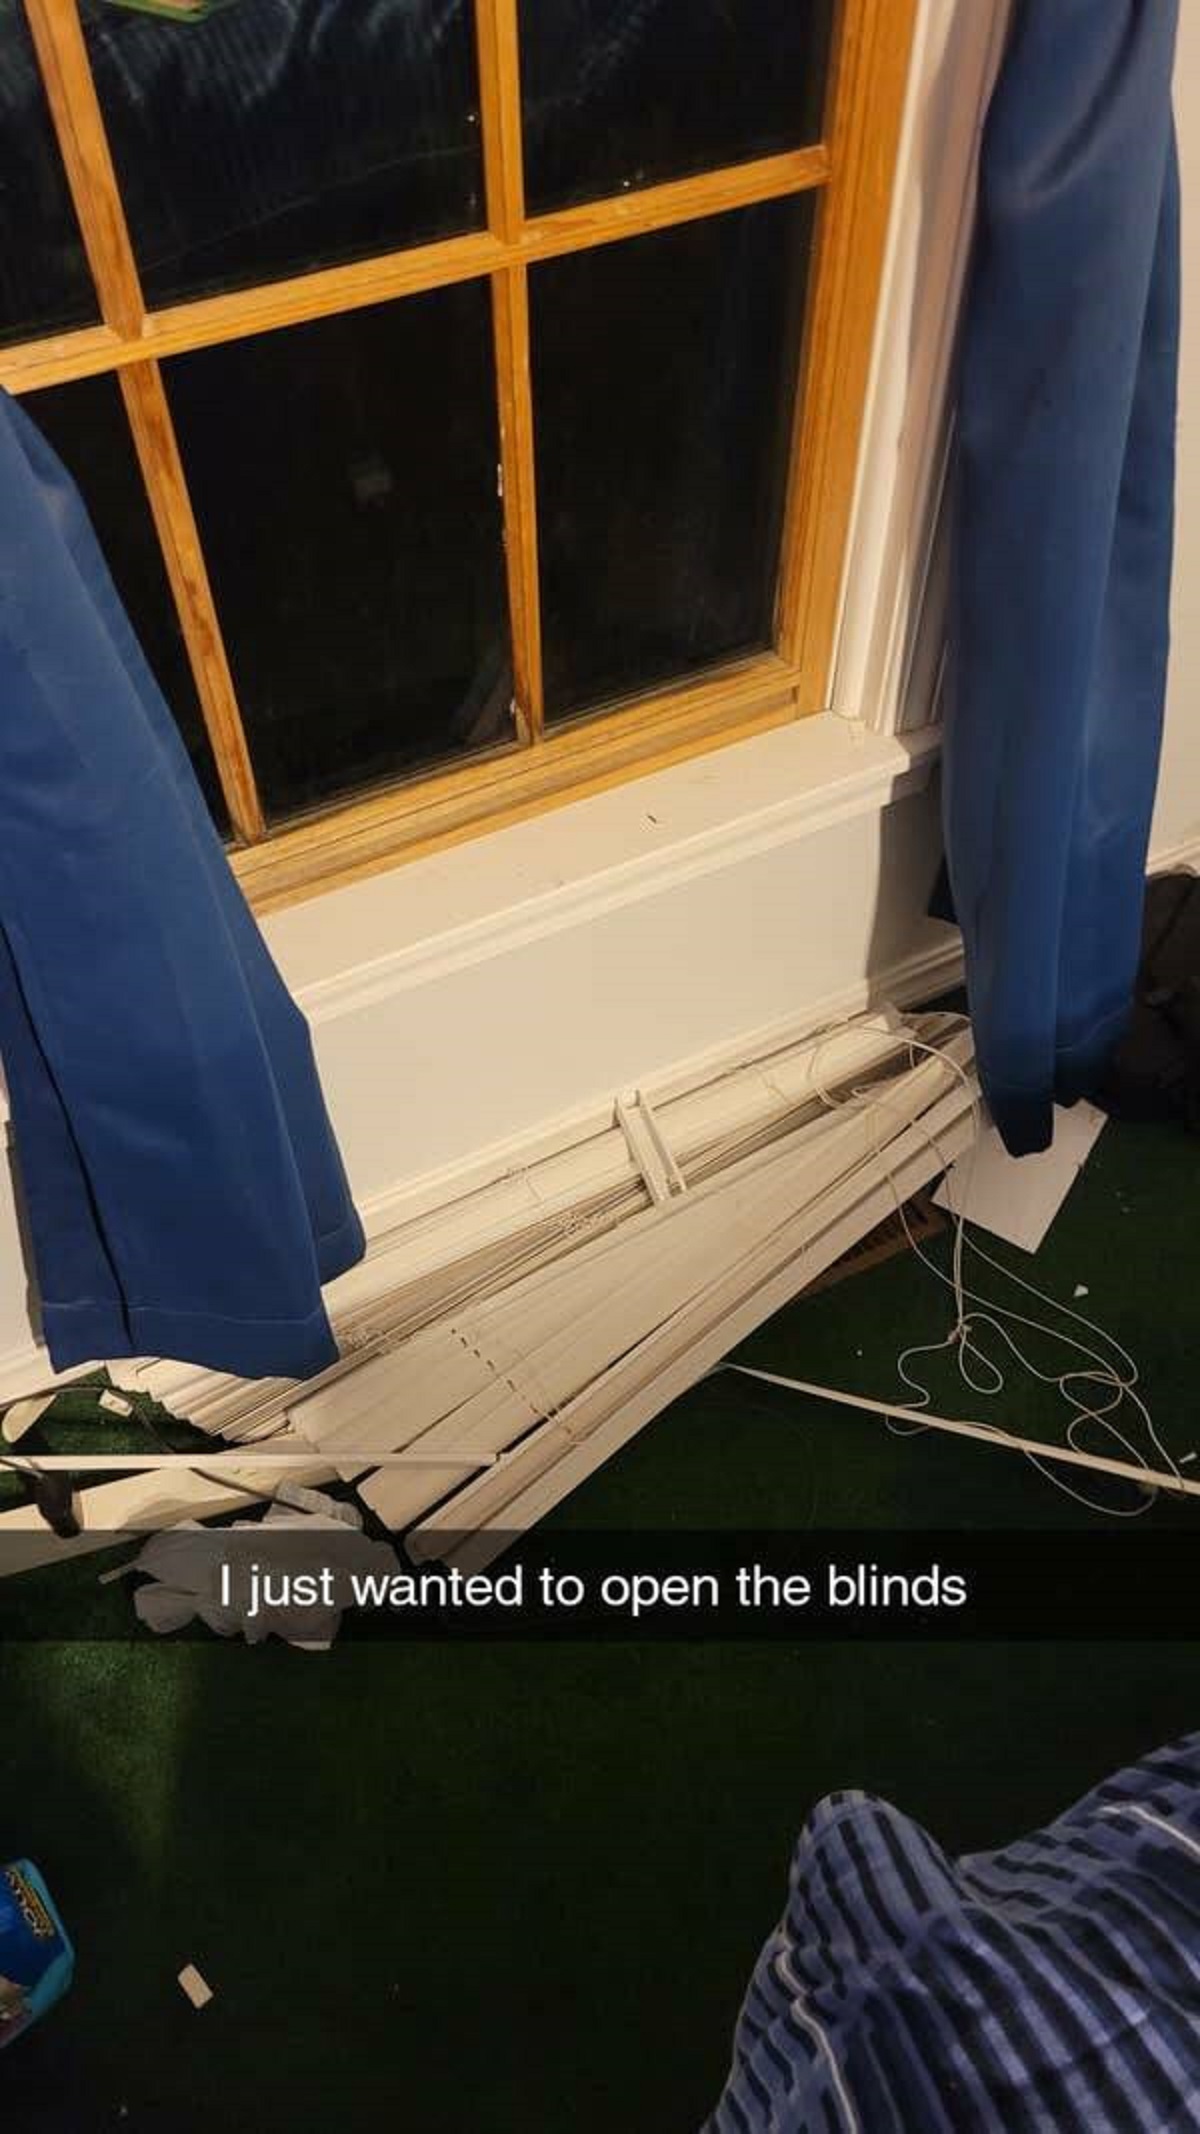 37 Unlucky People Having a Very Rough Day